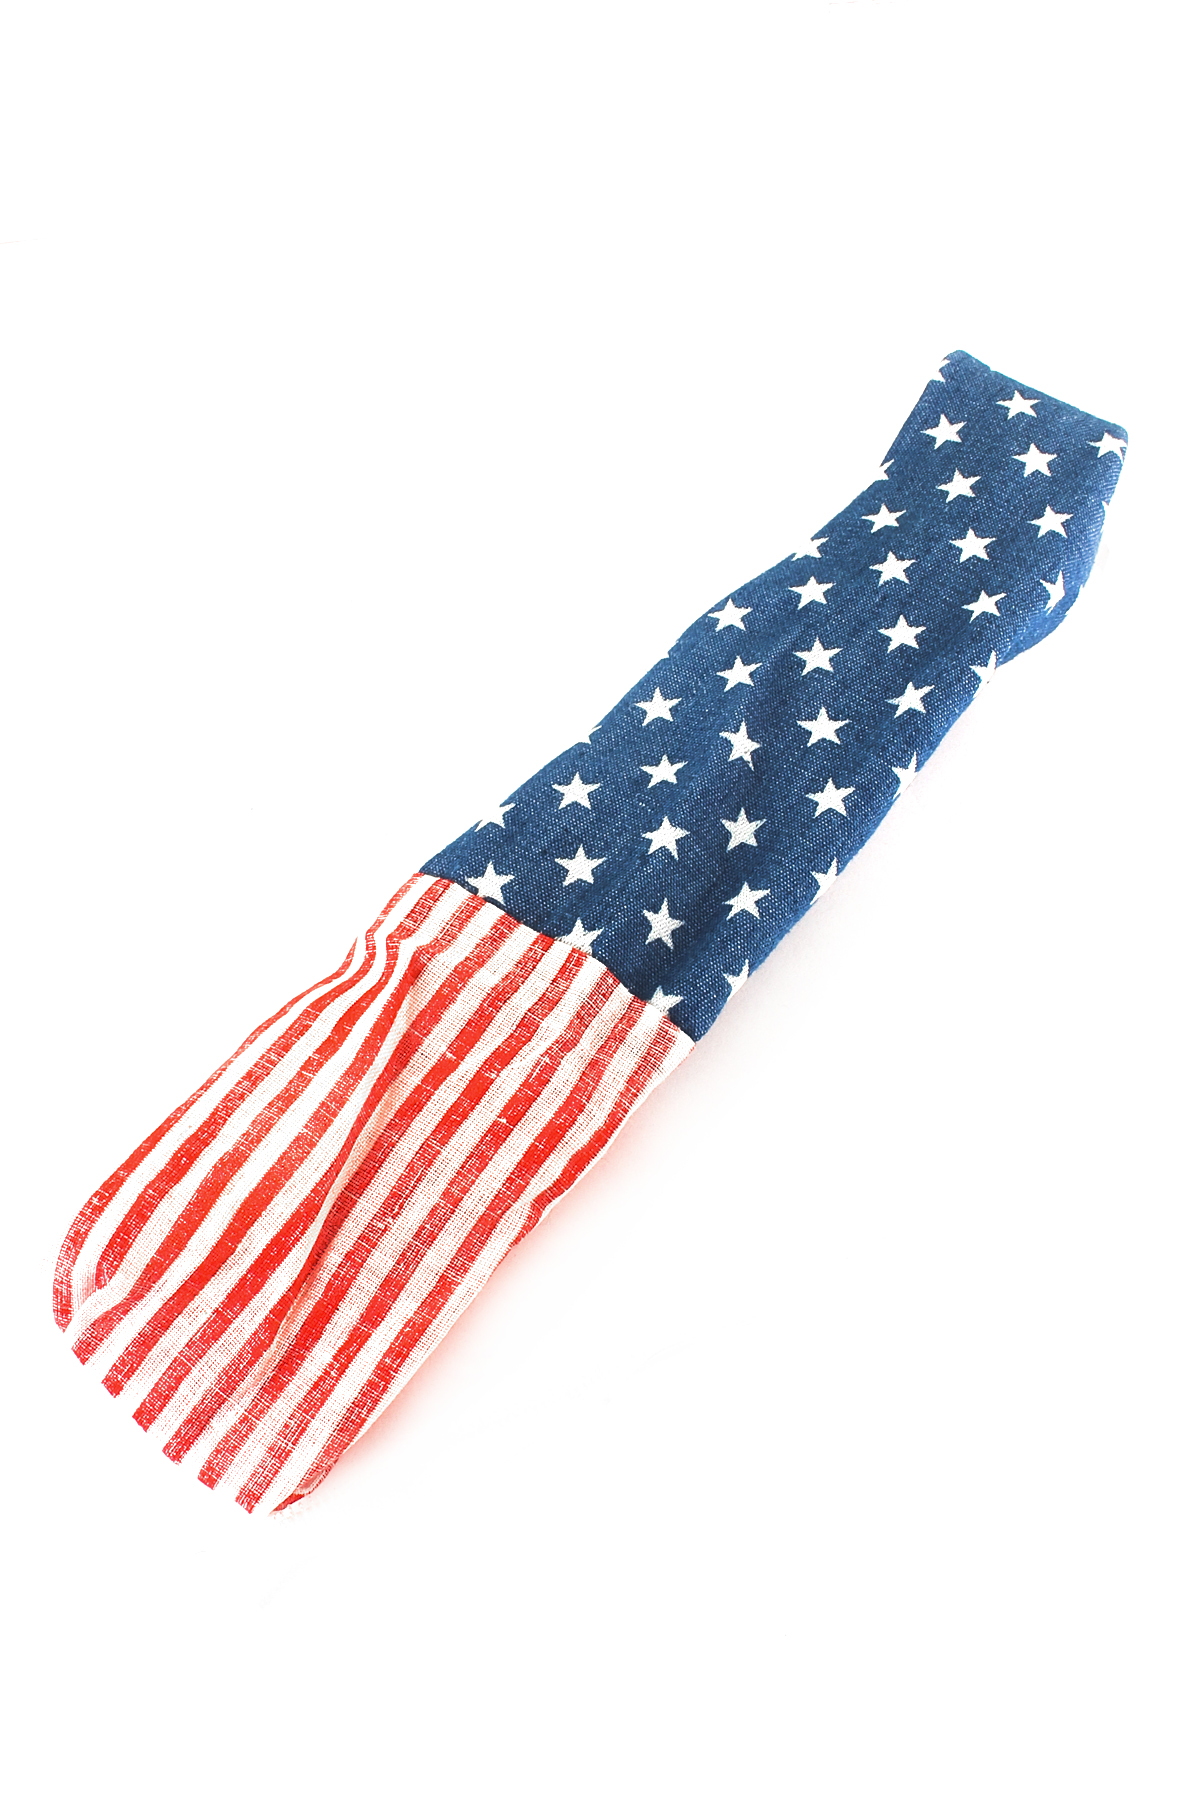 Woven American Flag with Lace Headband - Hair Accessories